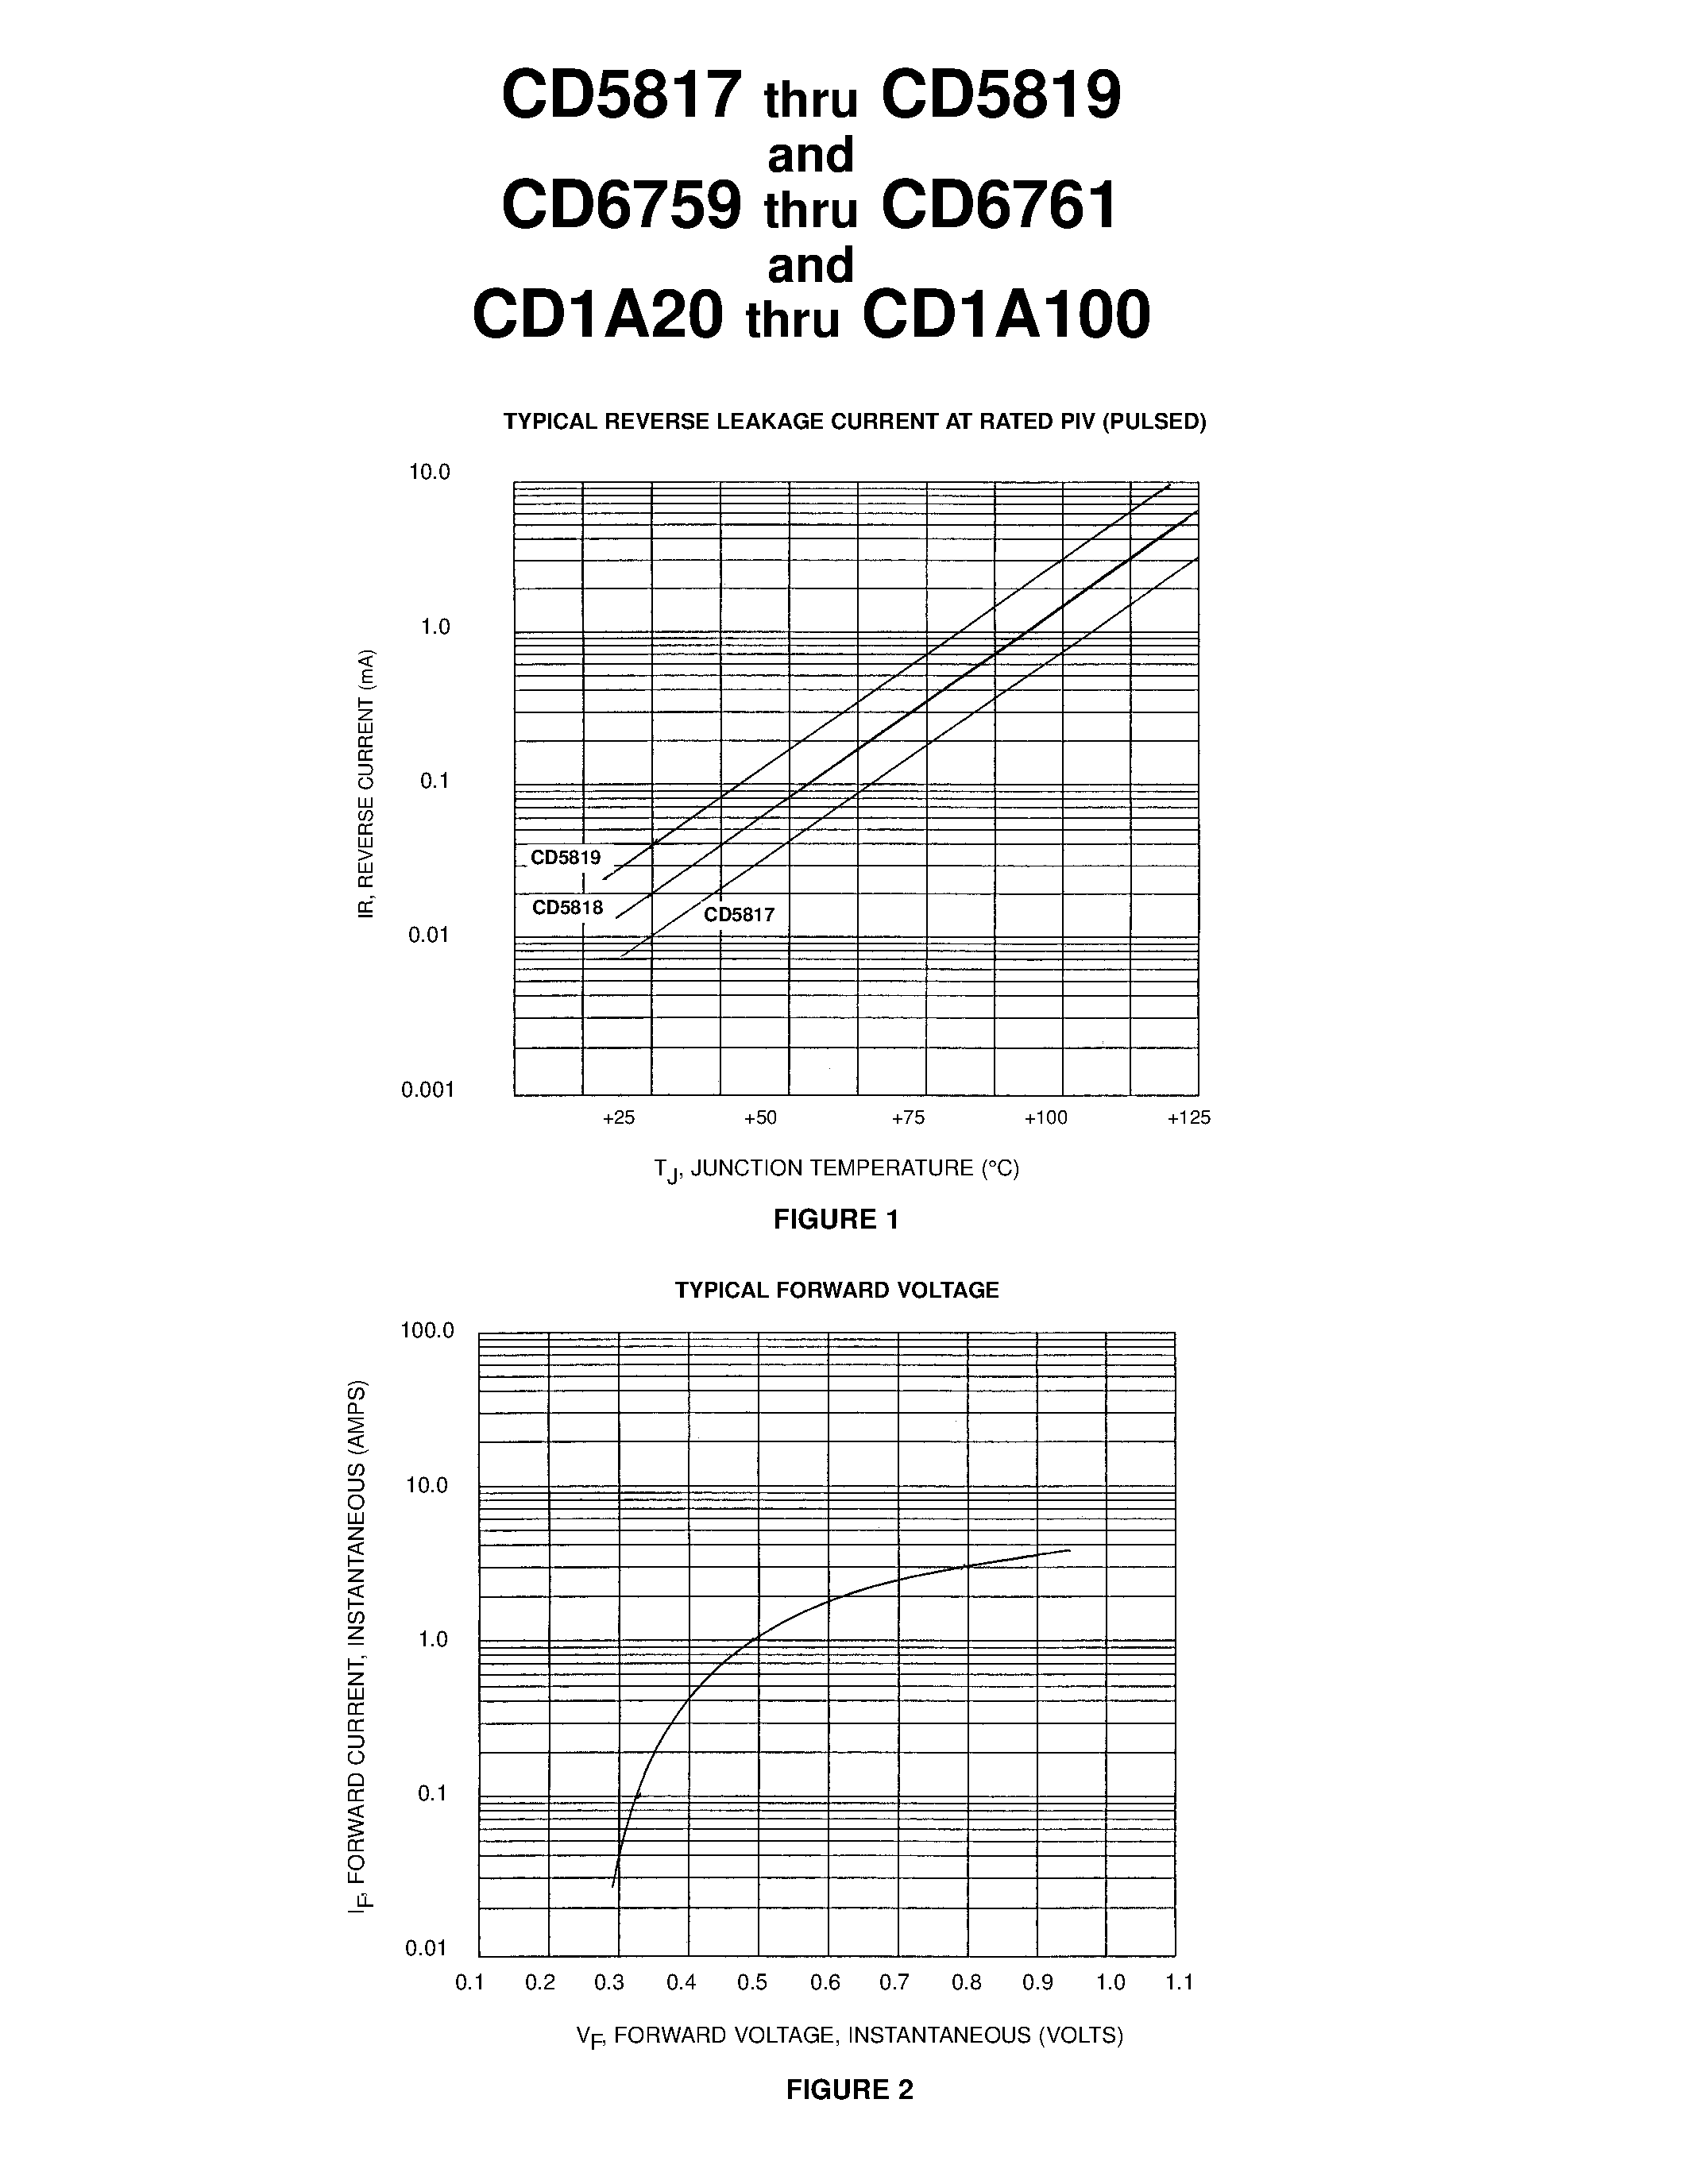 Datasheet CD1A40 - 1 AMP SCHOTTKY BARRIER RECTIFIER CHIPS page 2